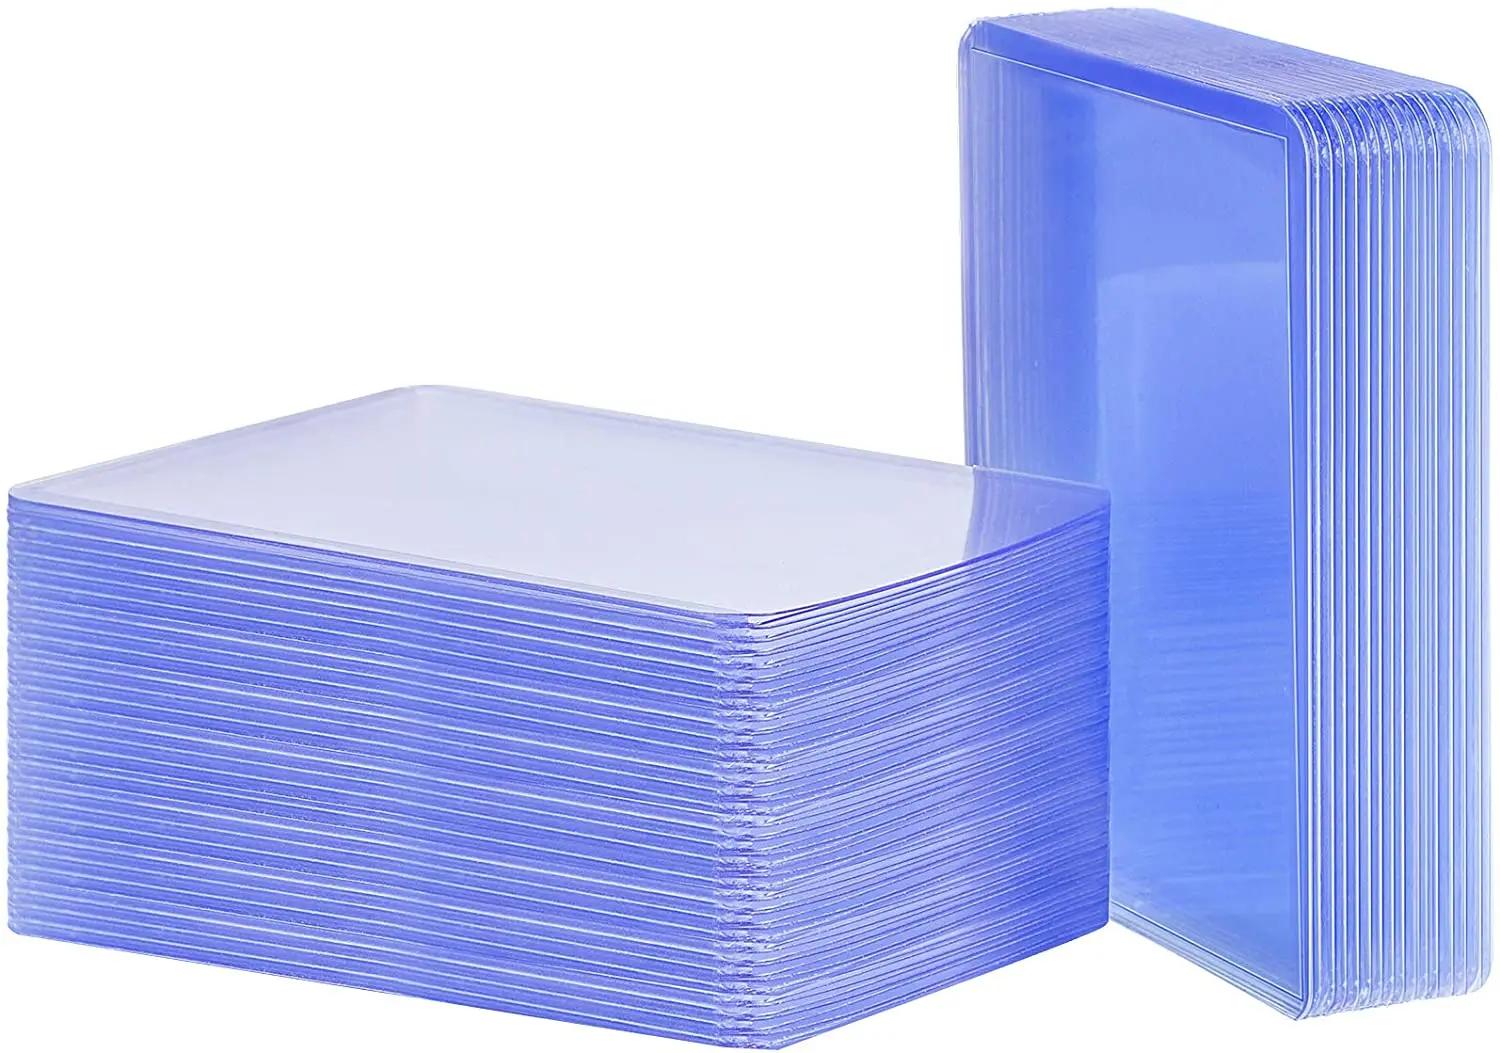 Z30 100 Clear Protective Sleeves īƮ Ȧ Toploaders for Collectible Trading   ī 35PT Rigid Plastic